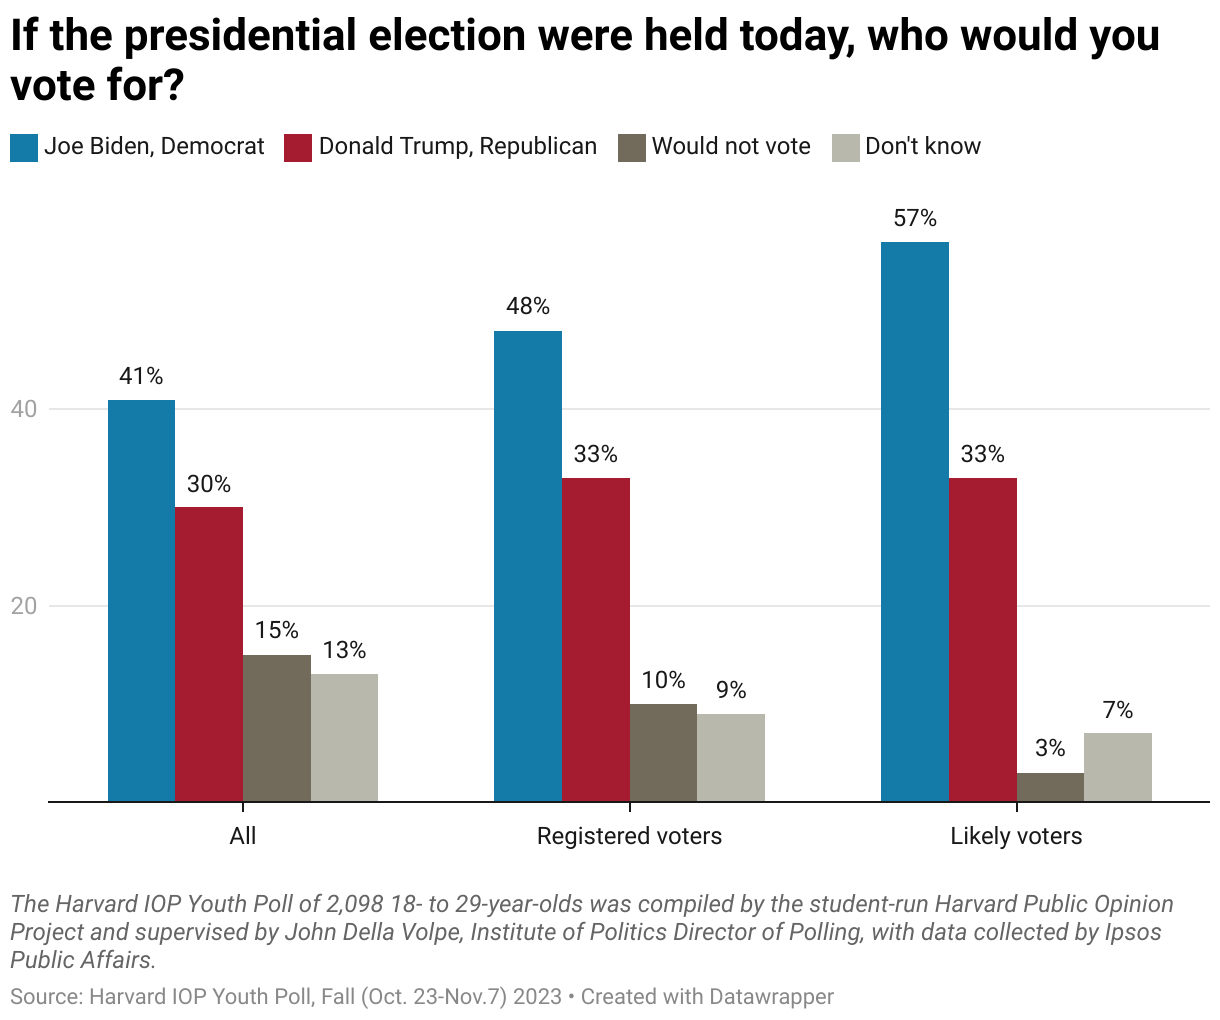 Bar chart captures who 18- to 29-year-old voters polled Oct. 23-Nov. 7 would cast ballot for if presidential election were held today: 41% Biden, 30% Trump, 15% would not vote, and 13% don’t know.